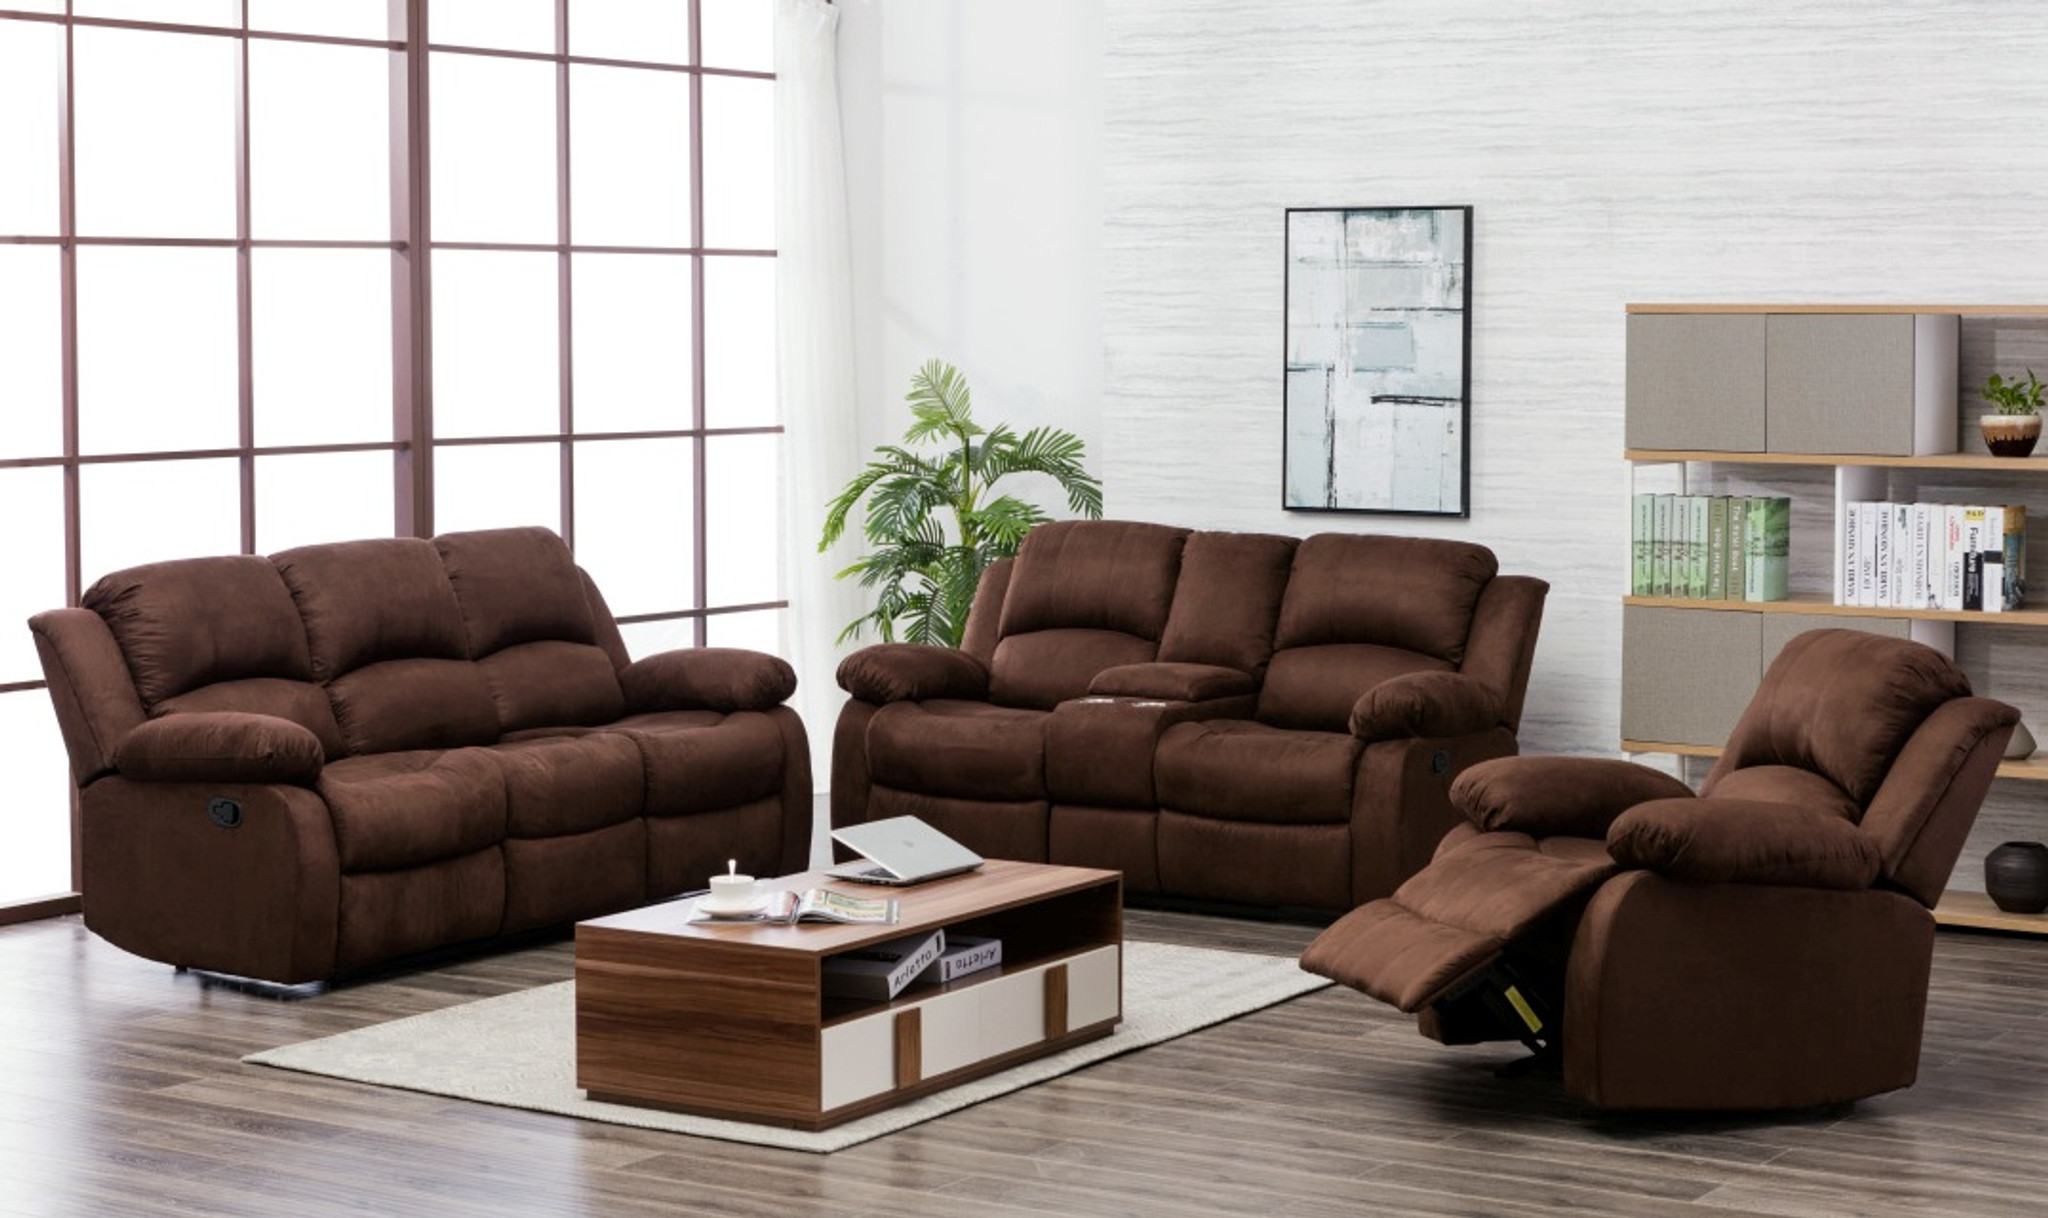 20200 2PCS MICROFIBER BROWN SOFA AND LOVESEAT SET COLLECTION By Happy Homes